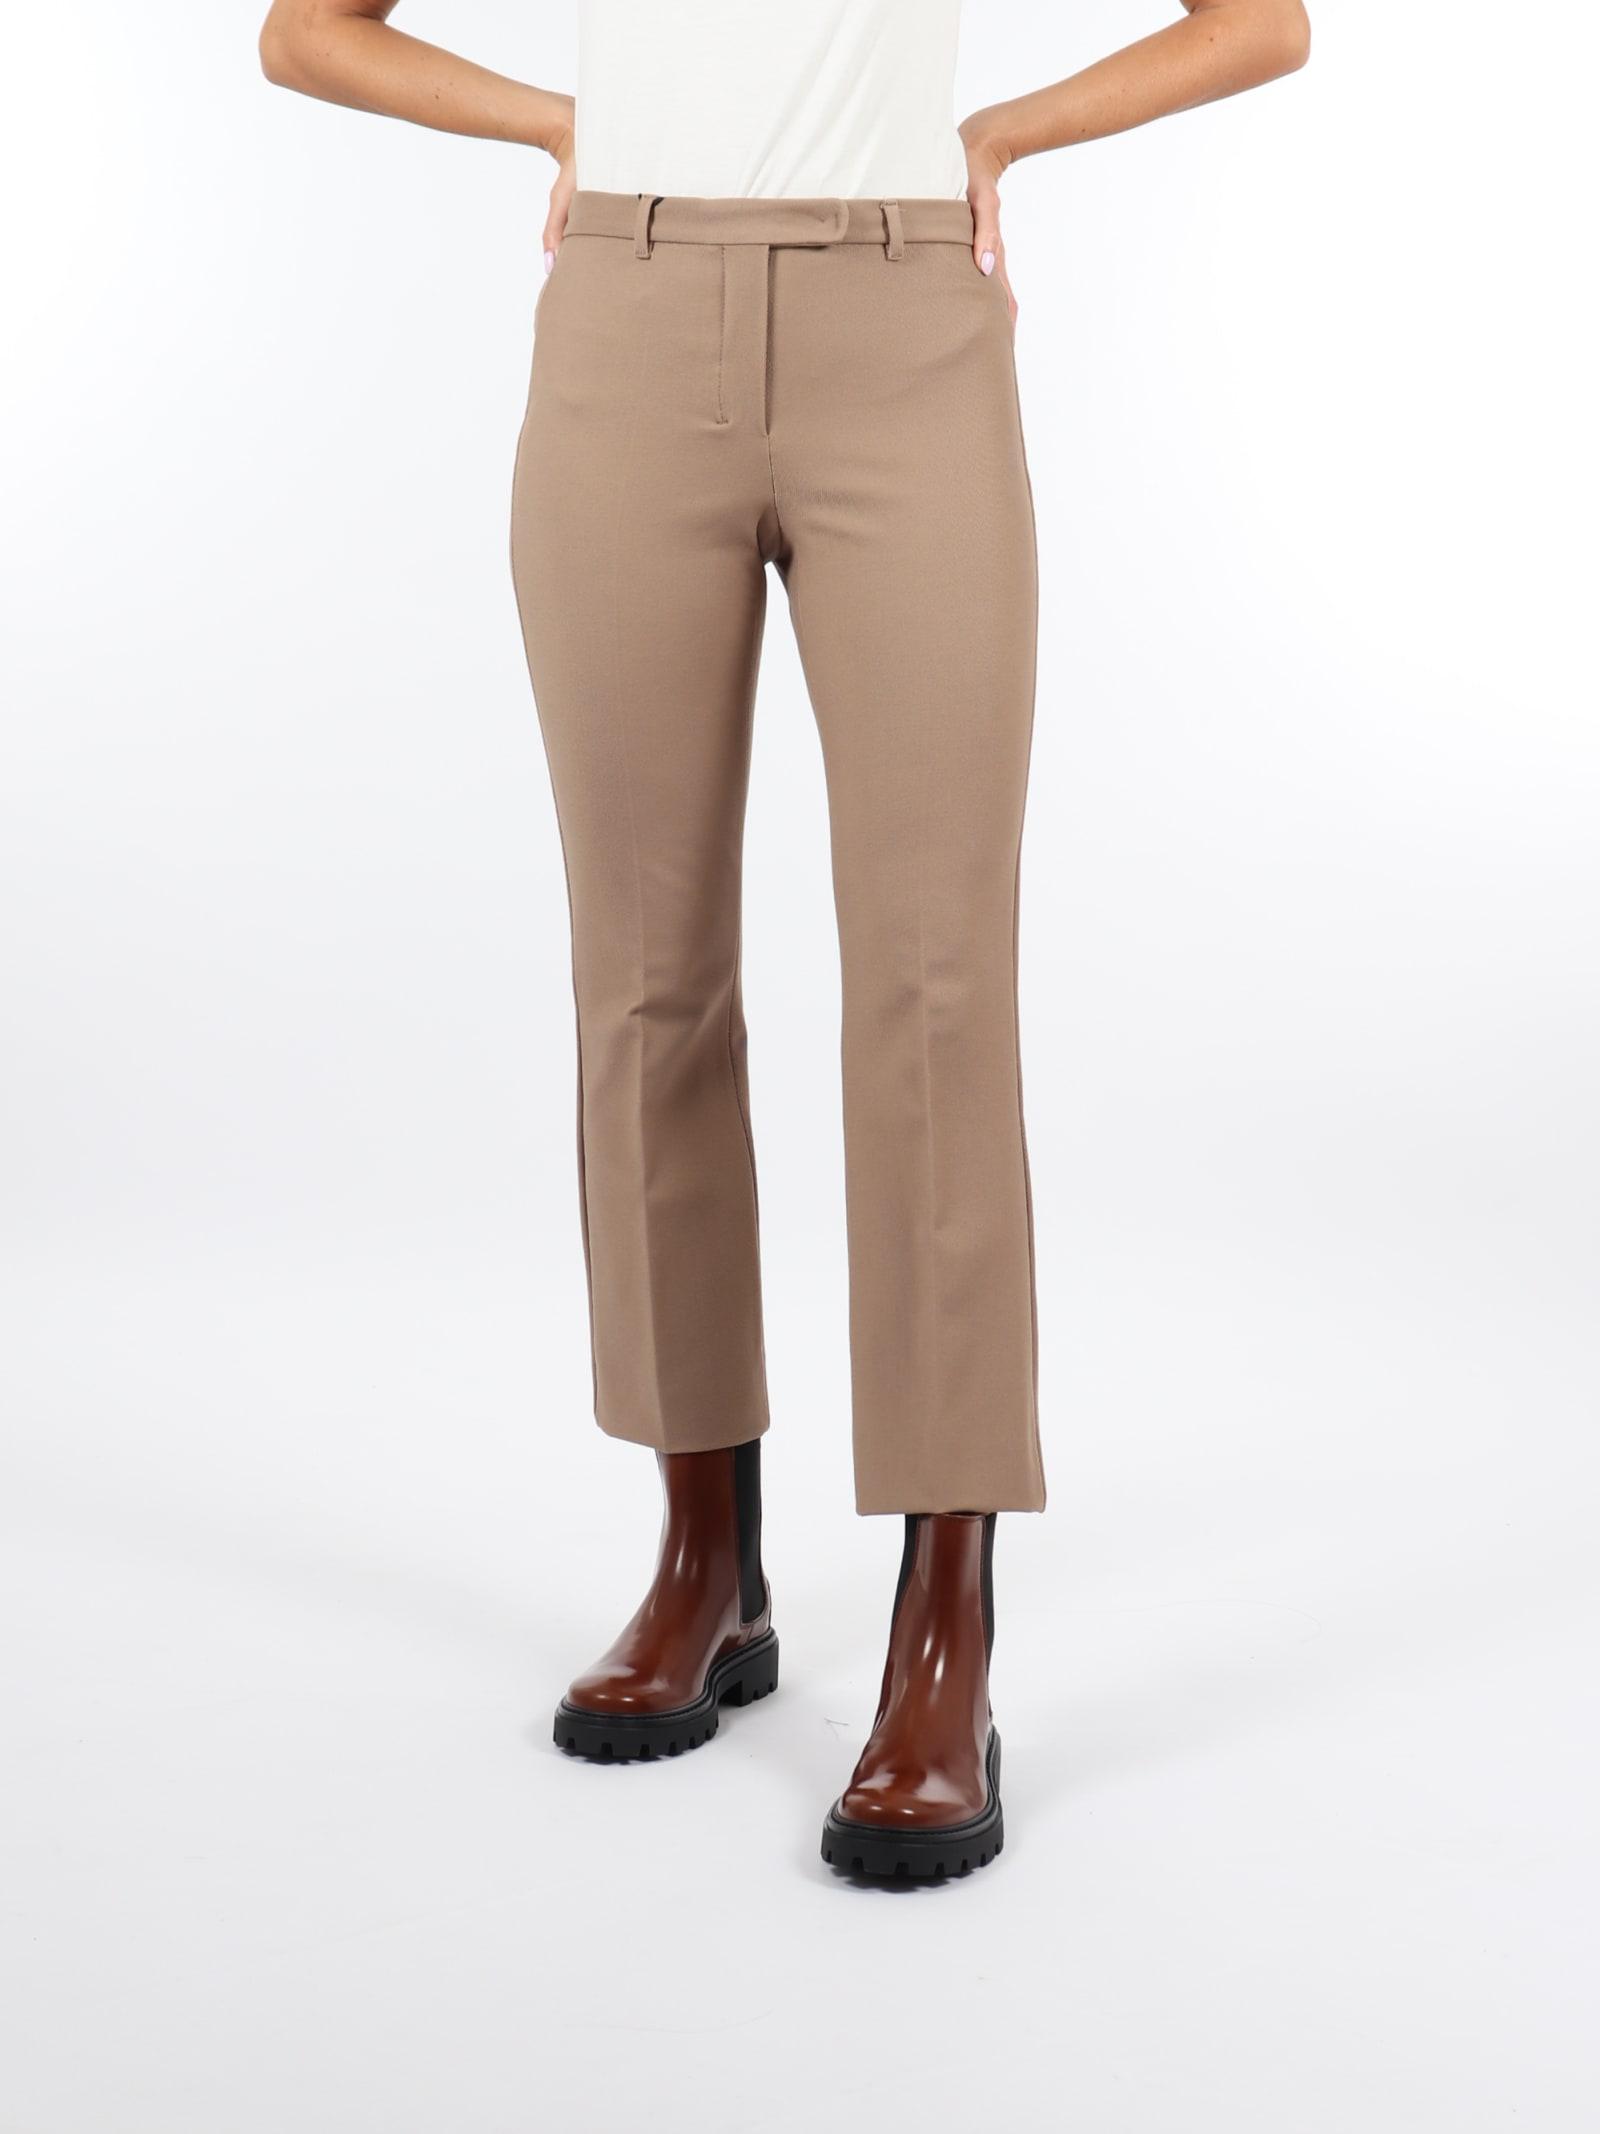 Womens Clothing Trousers Slacks and Chinos Capri and cropped trousers Max Mara Umanita Classic Cotton Blend Pants in Camel Natural 